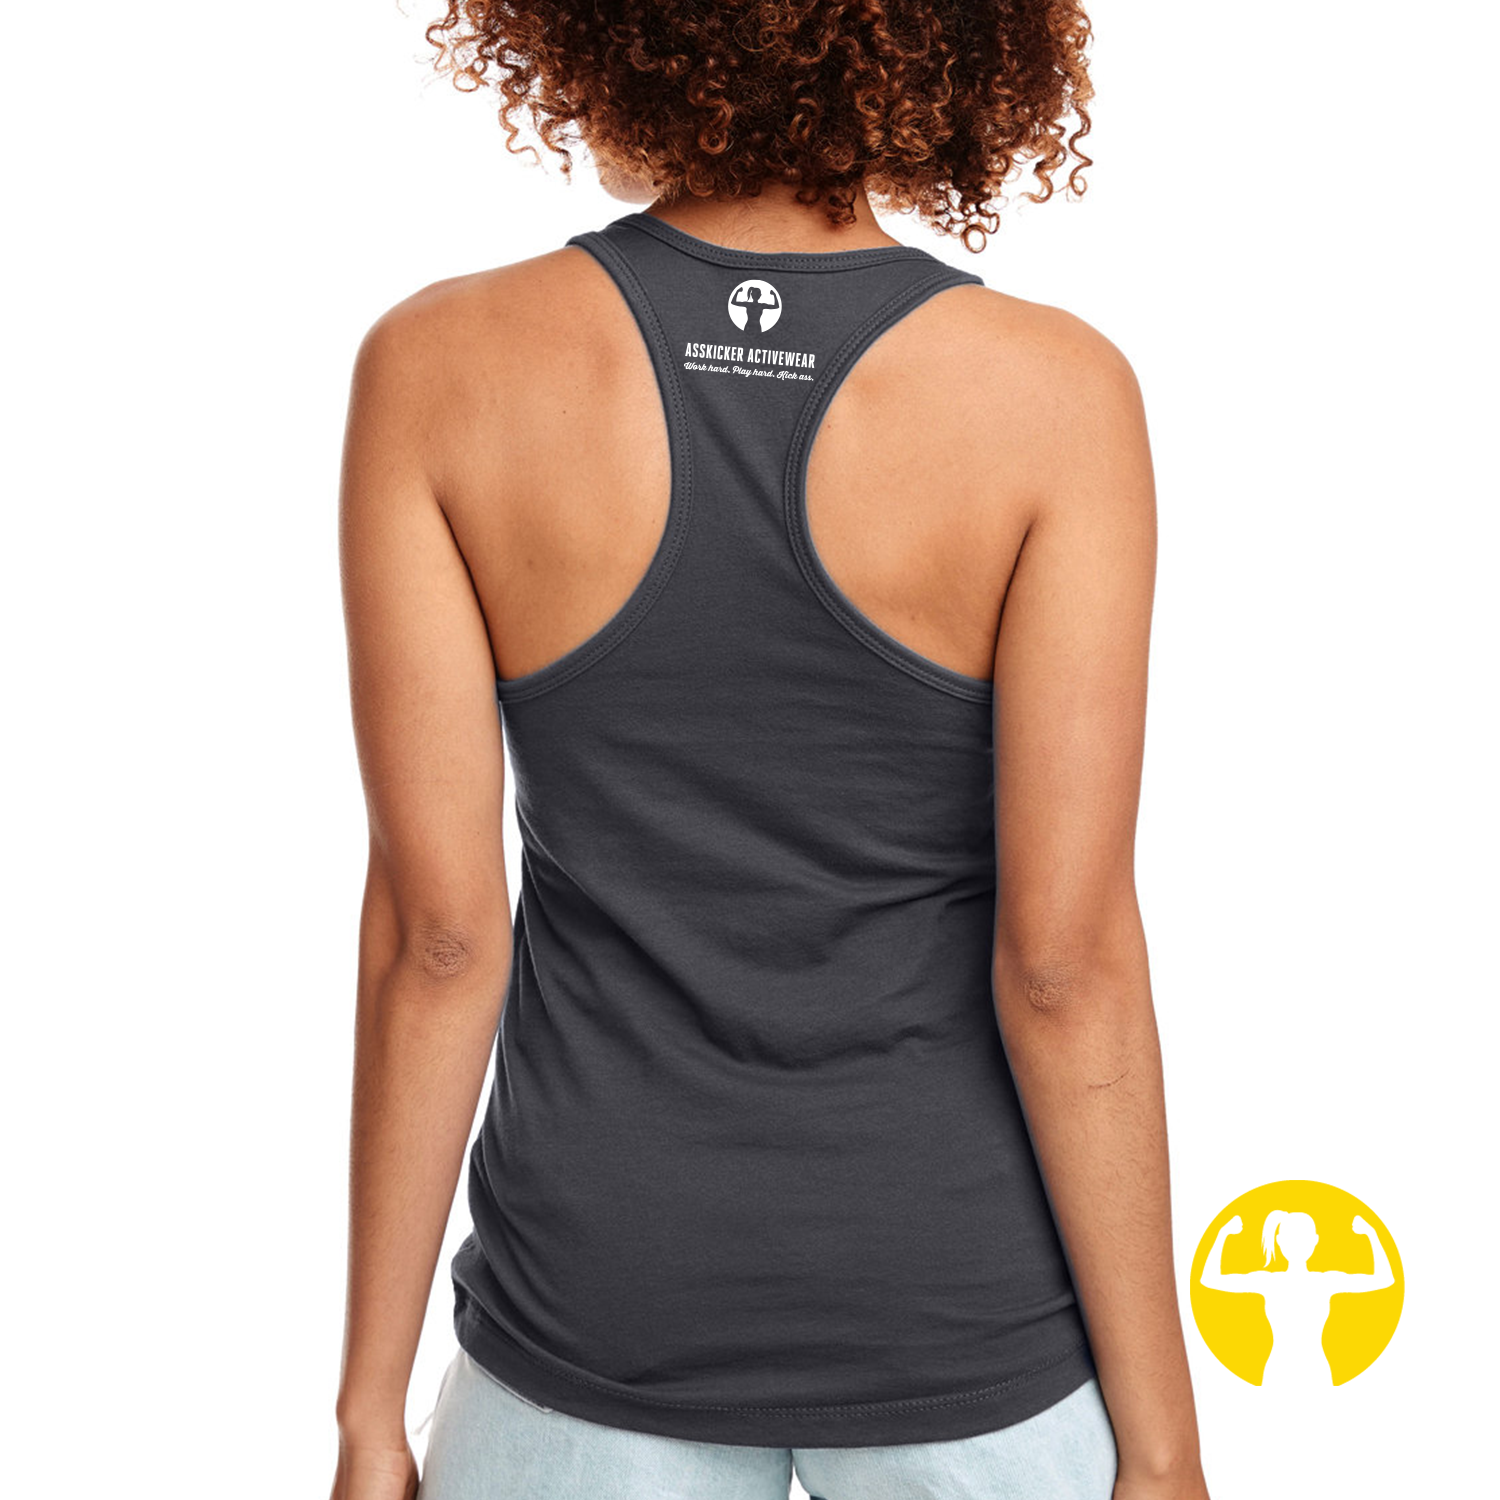 In Training to be a Fit Badass - funny gym tanks from Asskicker Activewear in Barrie, Ontario Canada. Shop online, free curbside pickups.